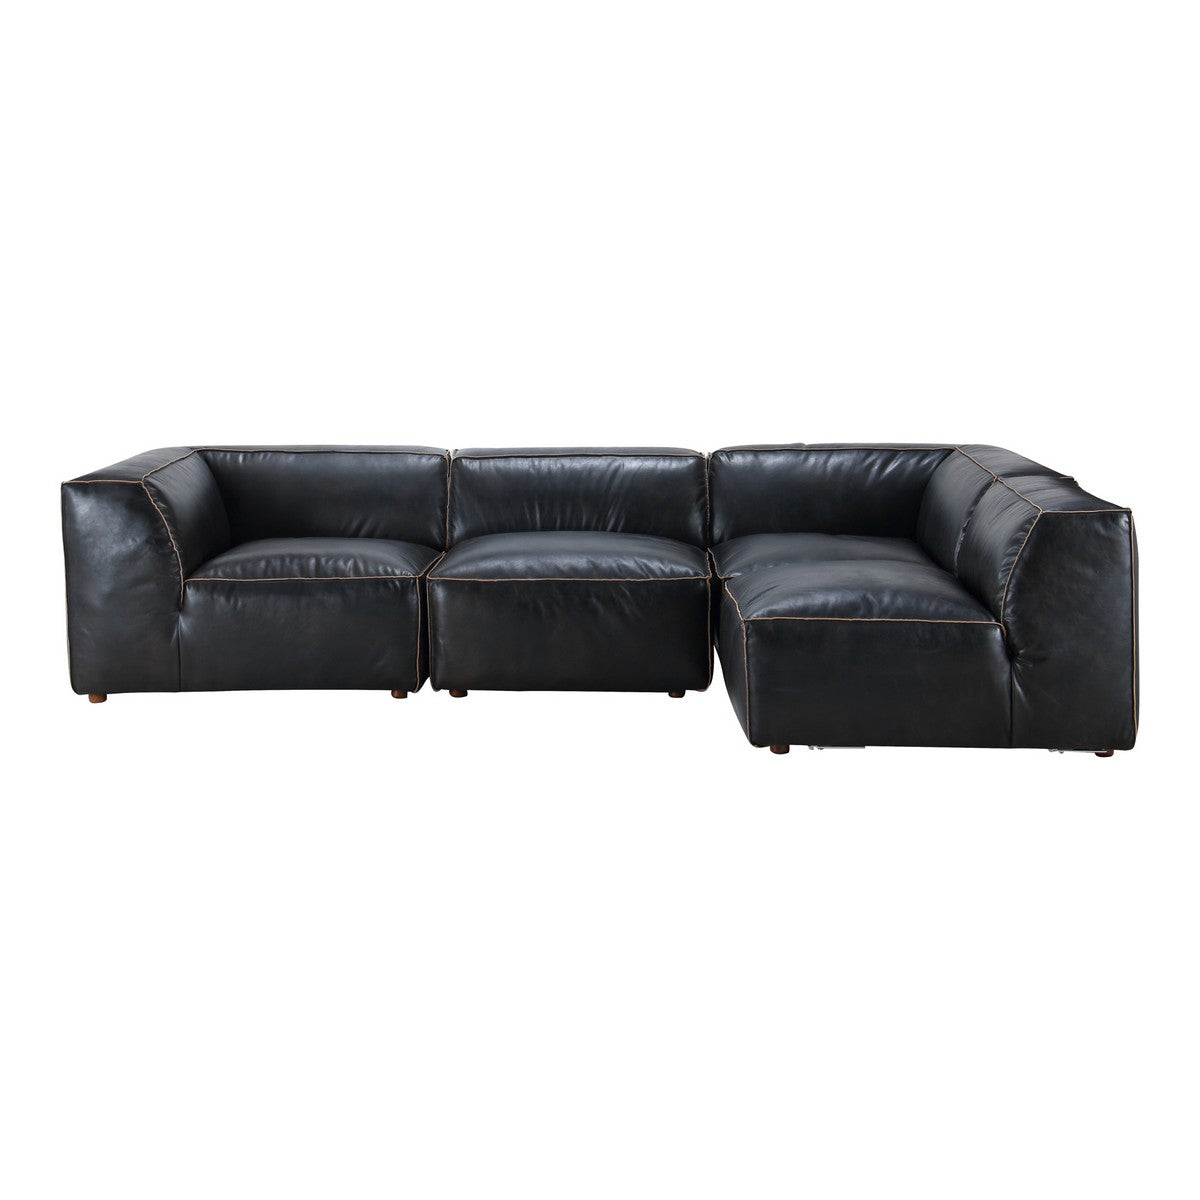 Moe's Home Collection Luxe Signature Modular Sectional Antique Black - QN-1022-01 - Moe's Home Collection - Extras - Minimal And Modern - 1